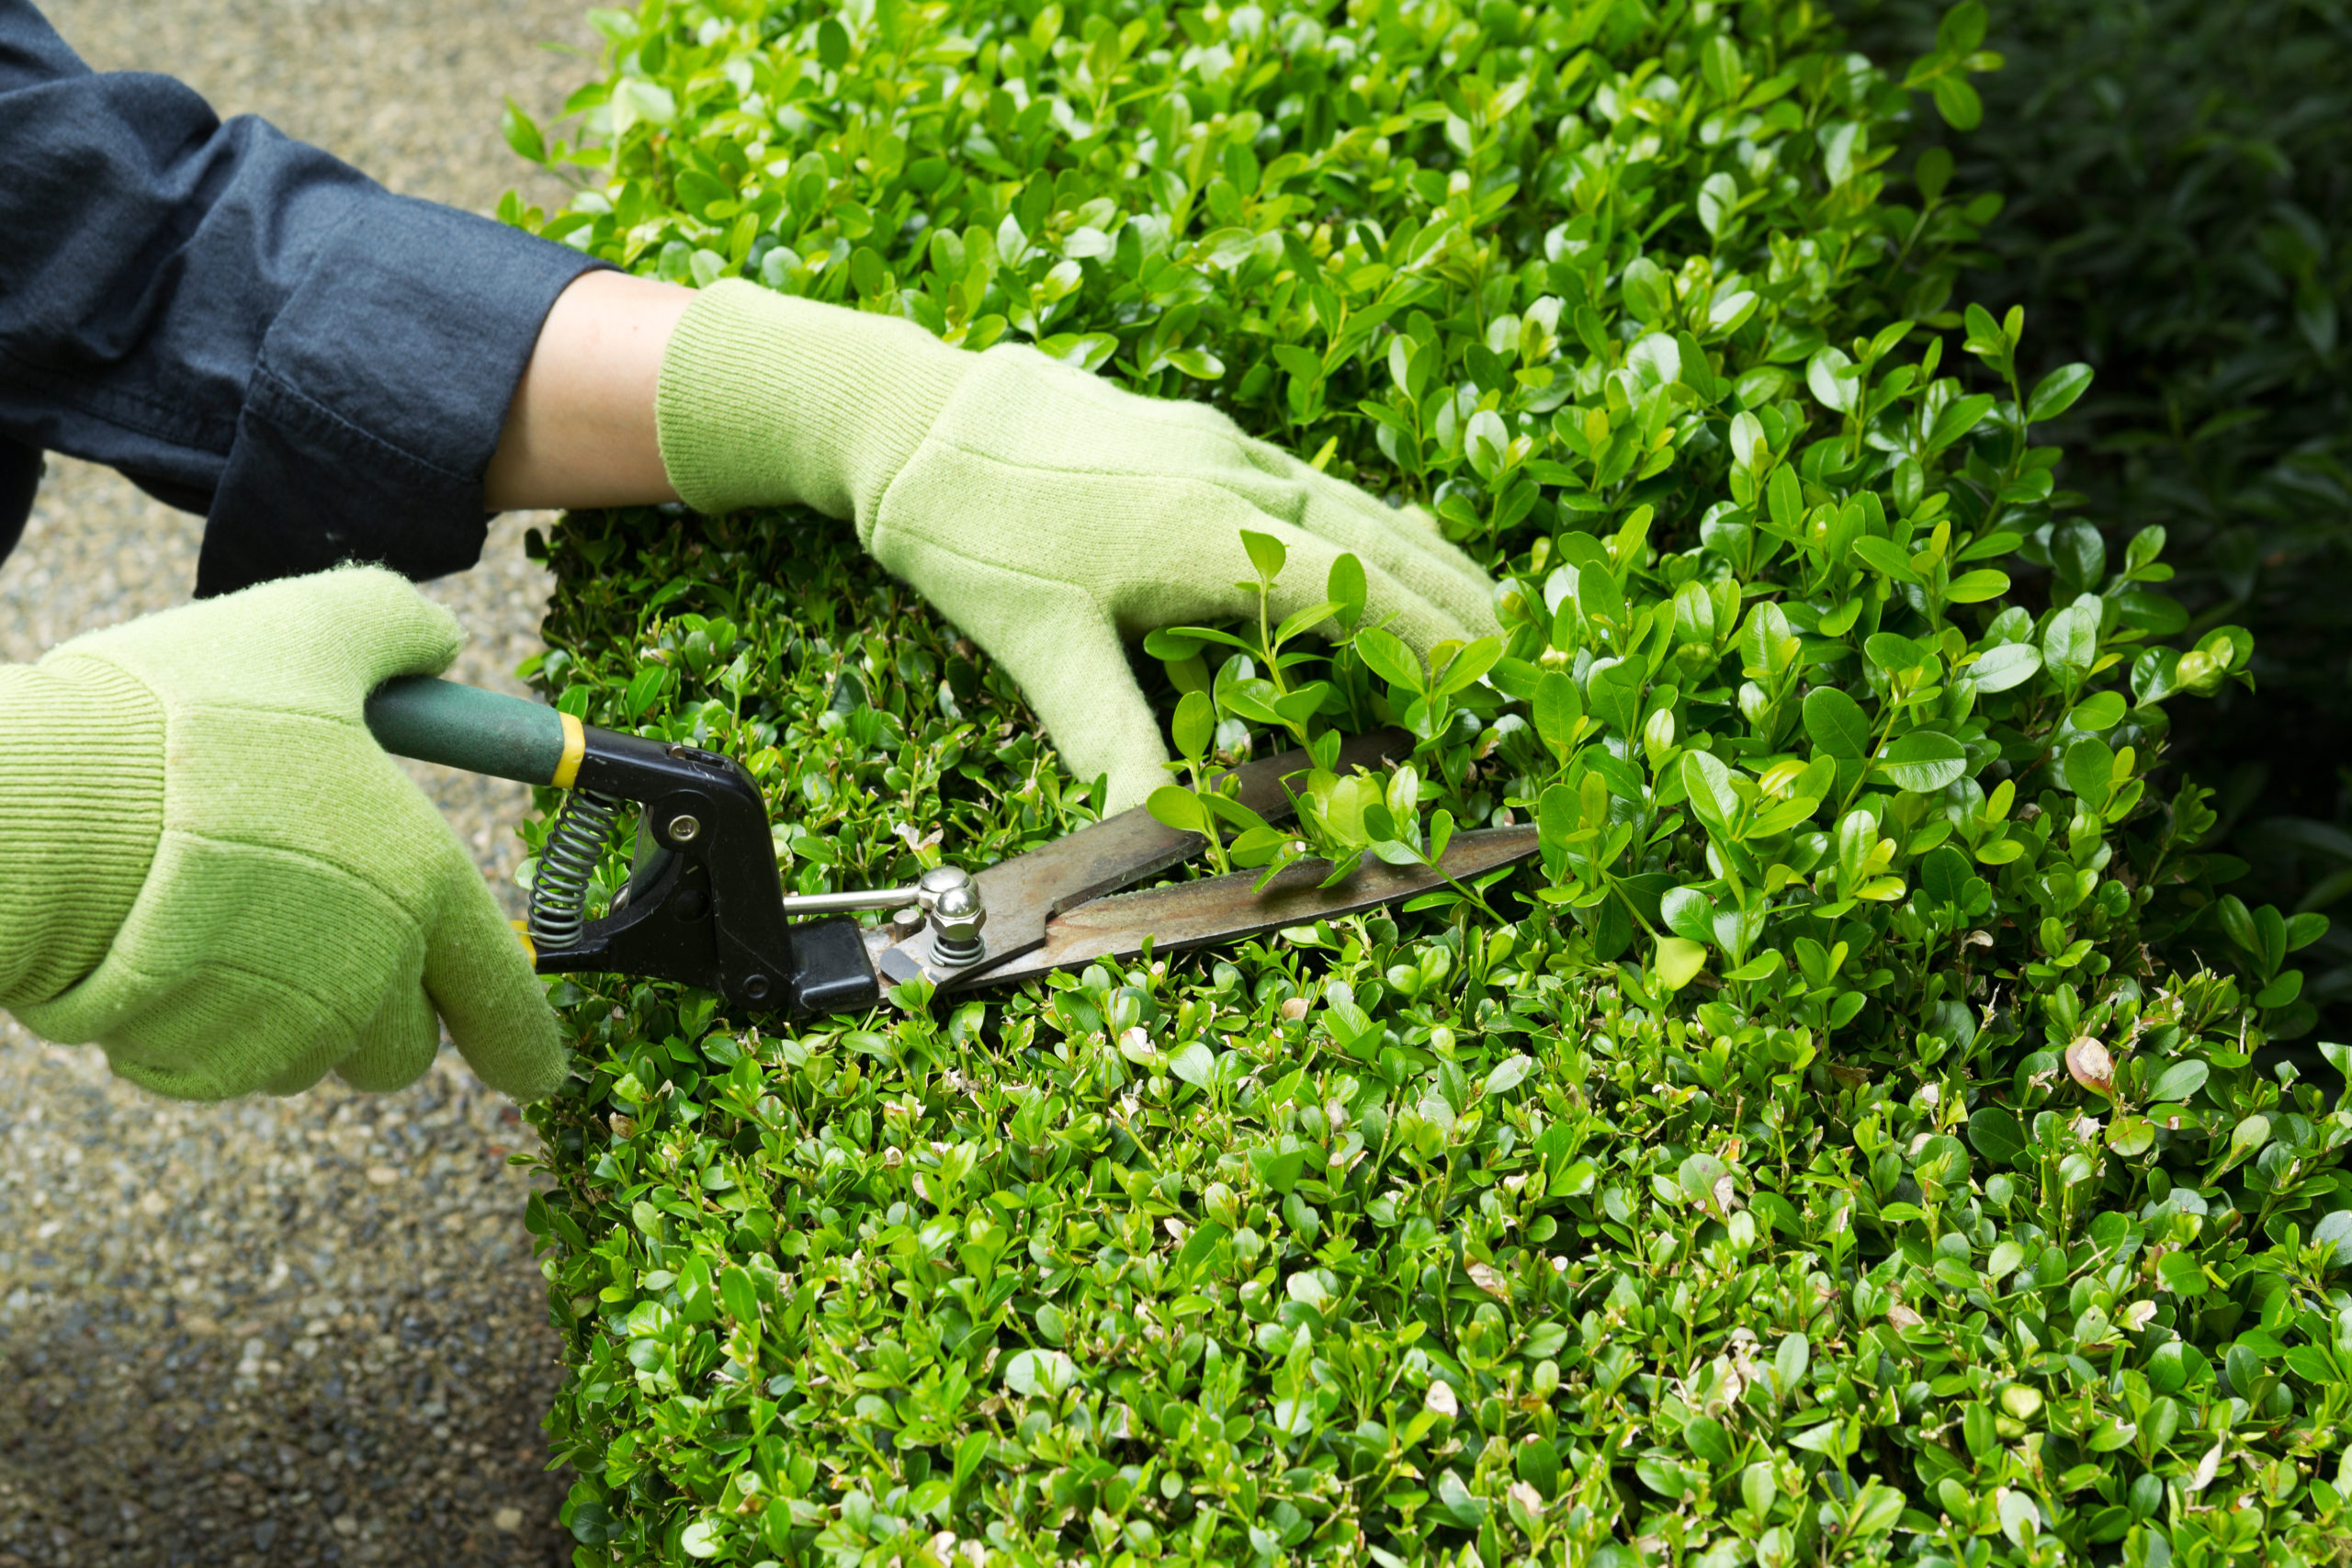 Trimming hedges with garden scissors wearing gloves